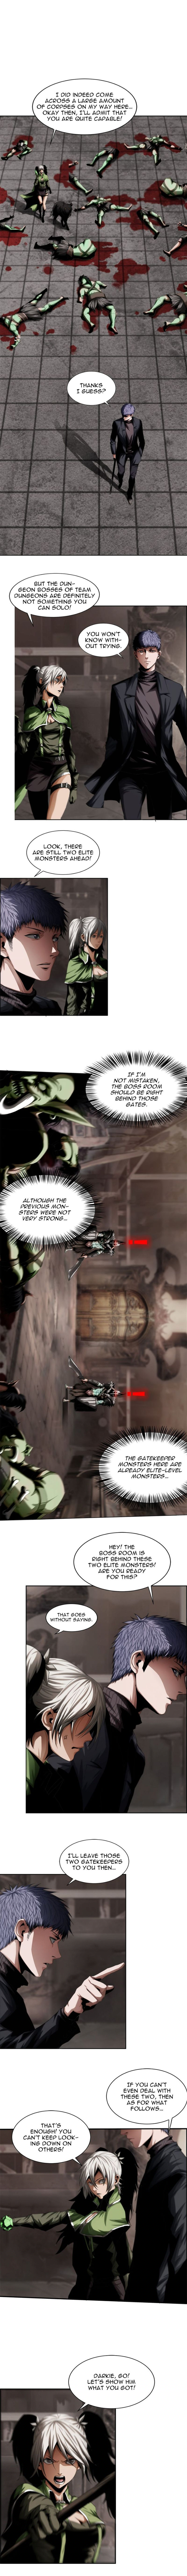 The Blade Of Evolution-Walking Alone In The Dungeon Chapter 16 page 3